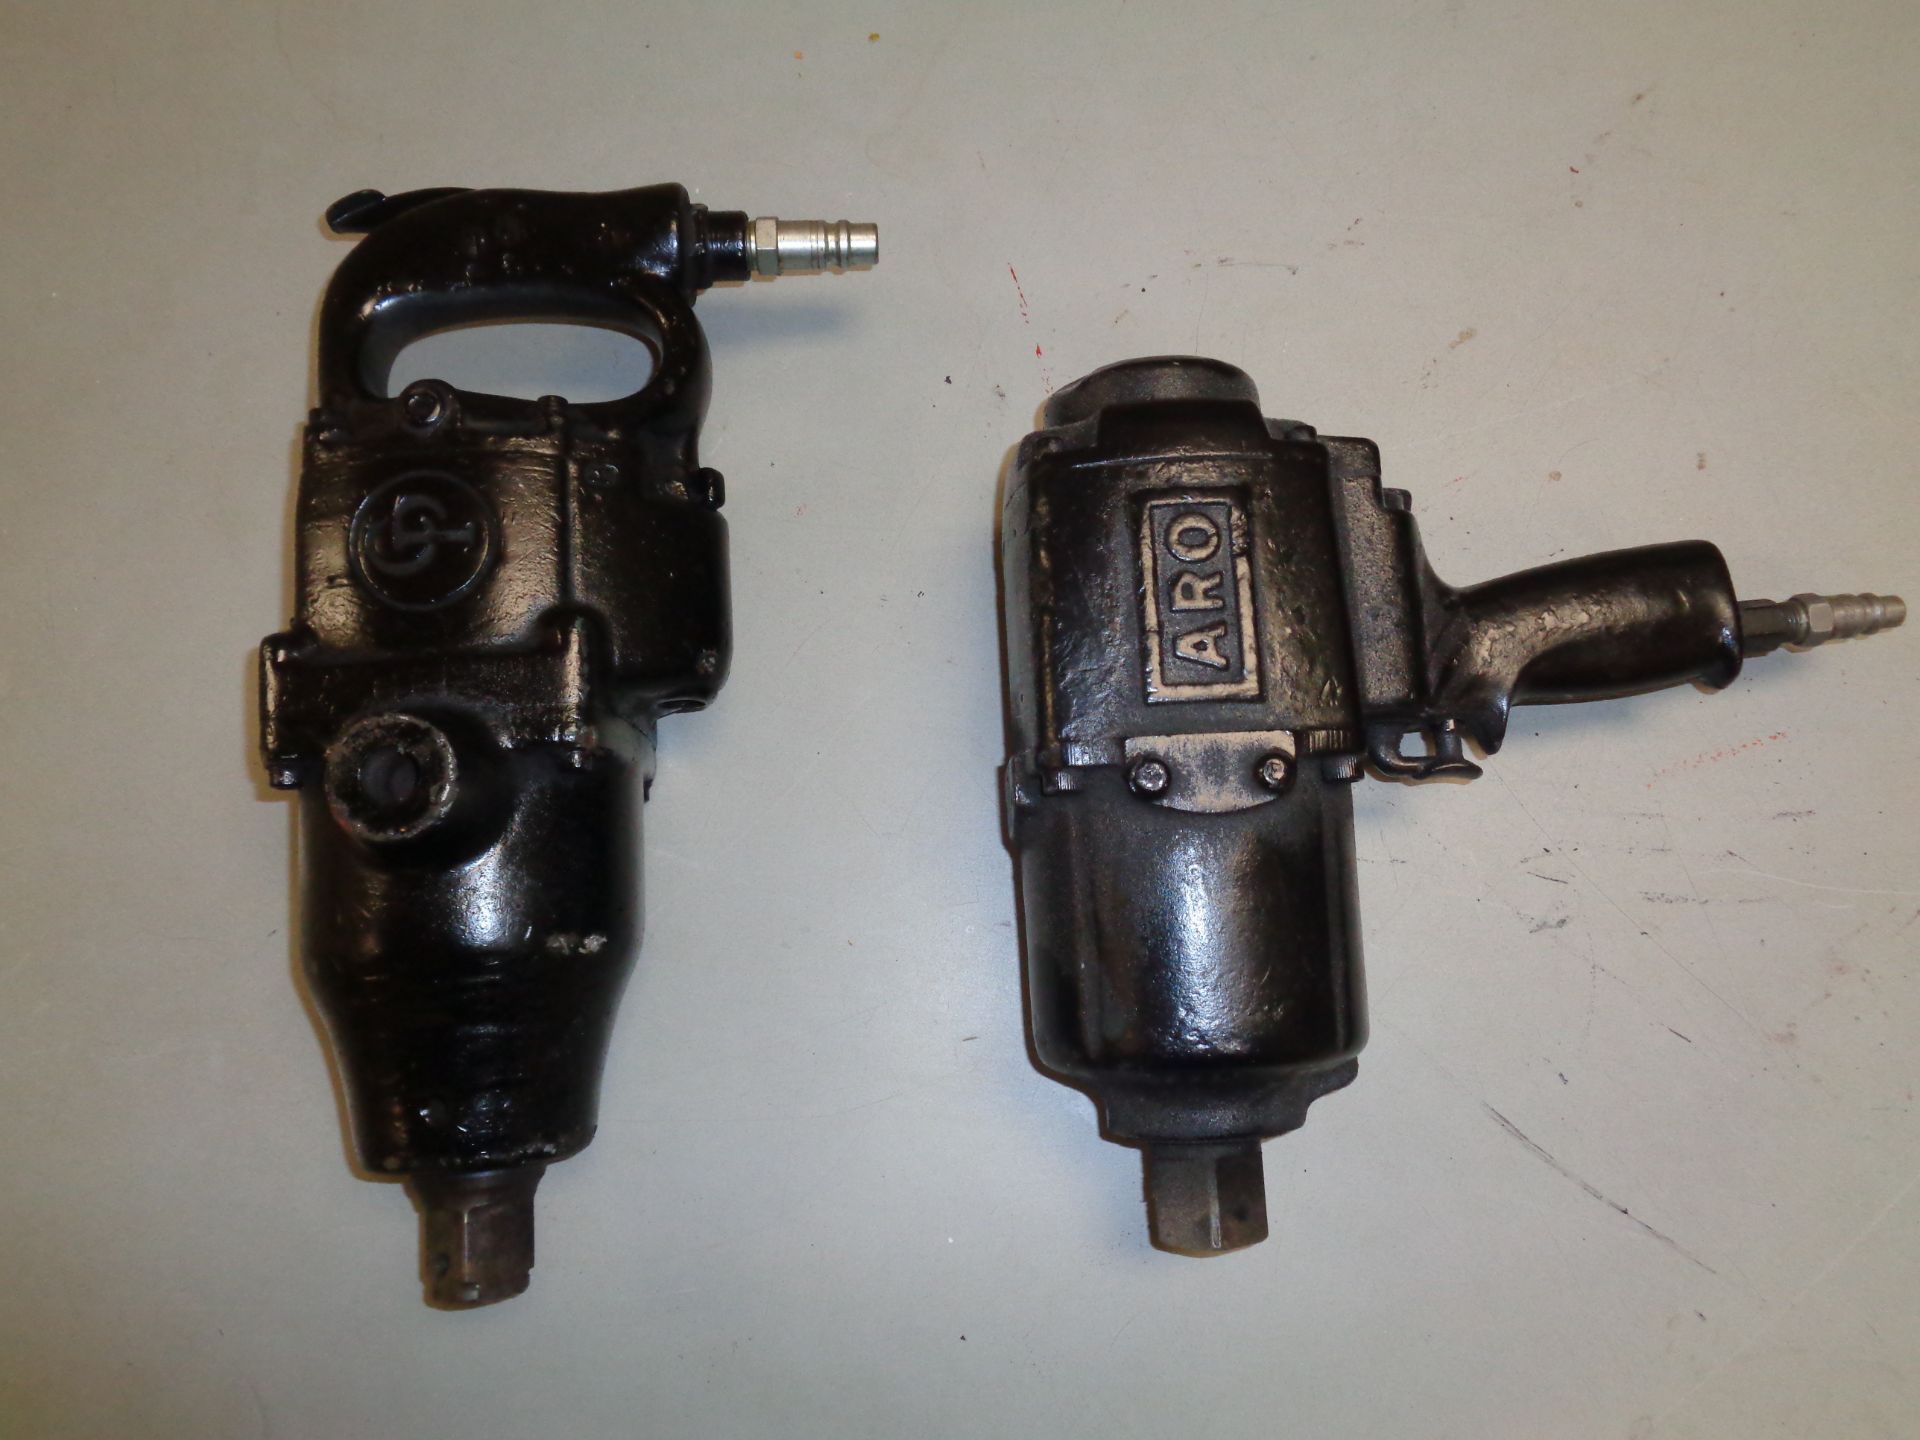 Lot of 2 3/4in Drive Impact Guns - Image 3 of 5